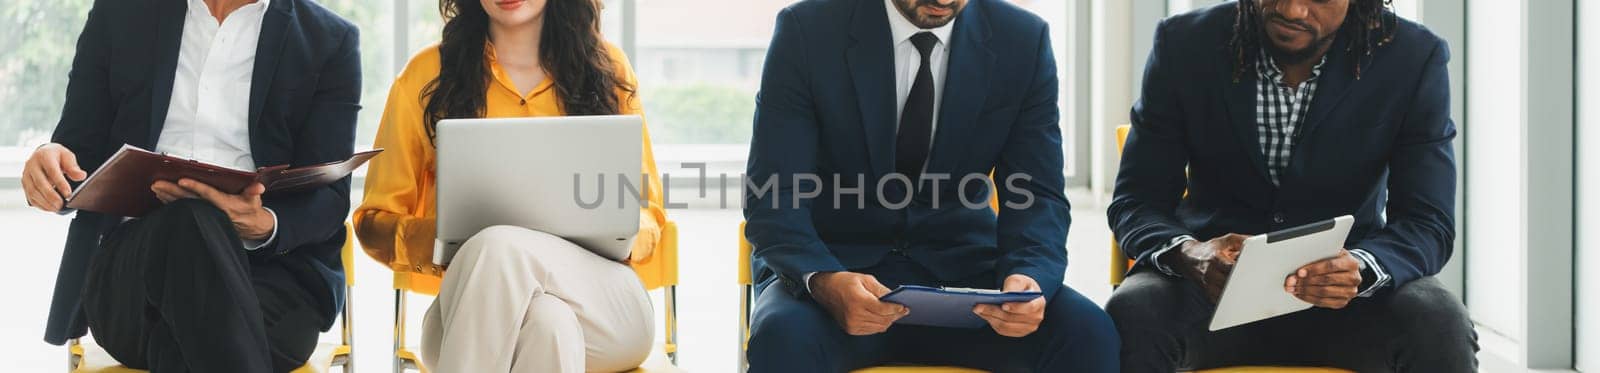 Diversity candidates siting while waiting for job interview in front view. Low section crop of interviewees sitting on a chair while preparing their document and holding their laptop. Intellectual.